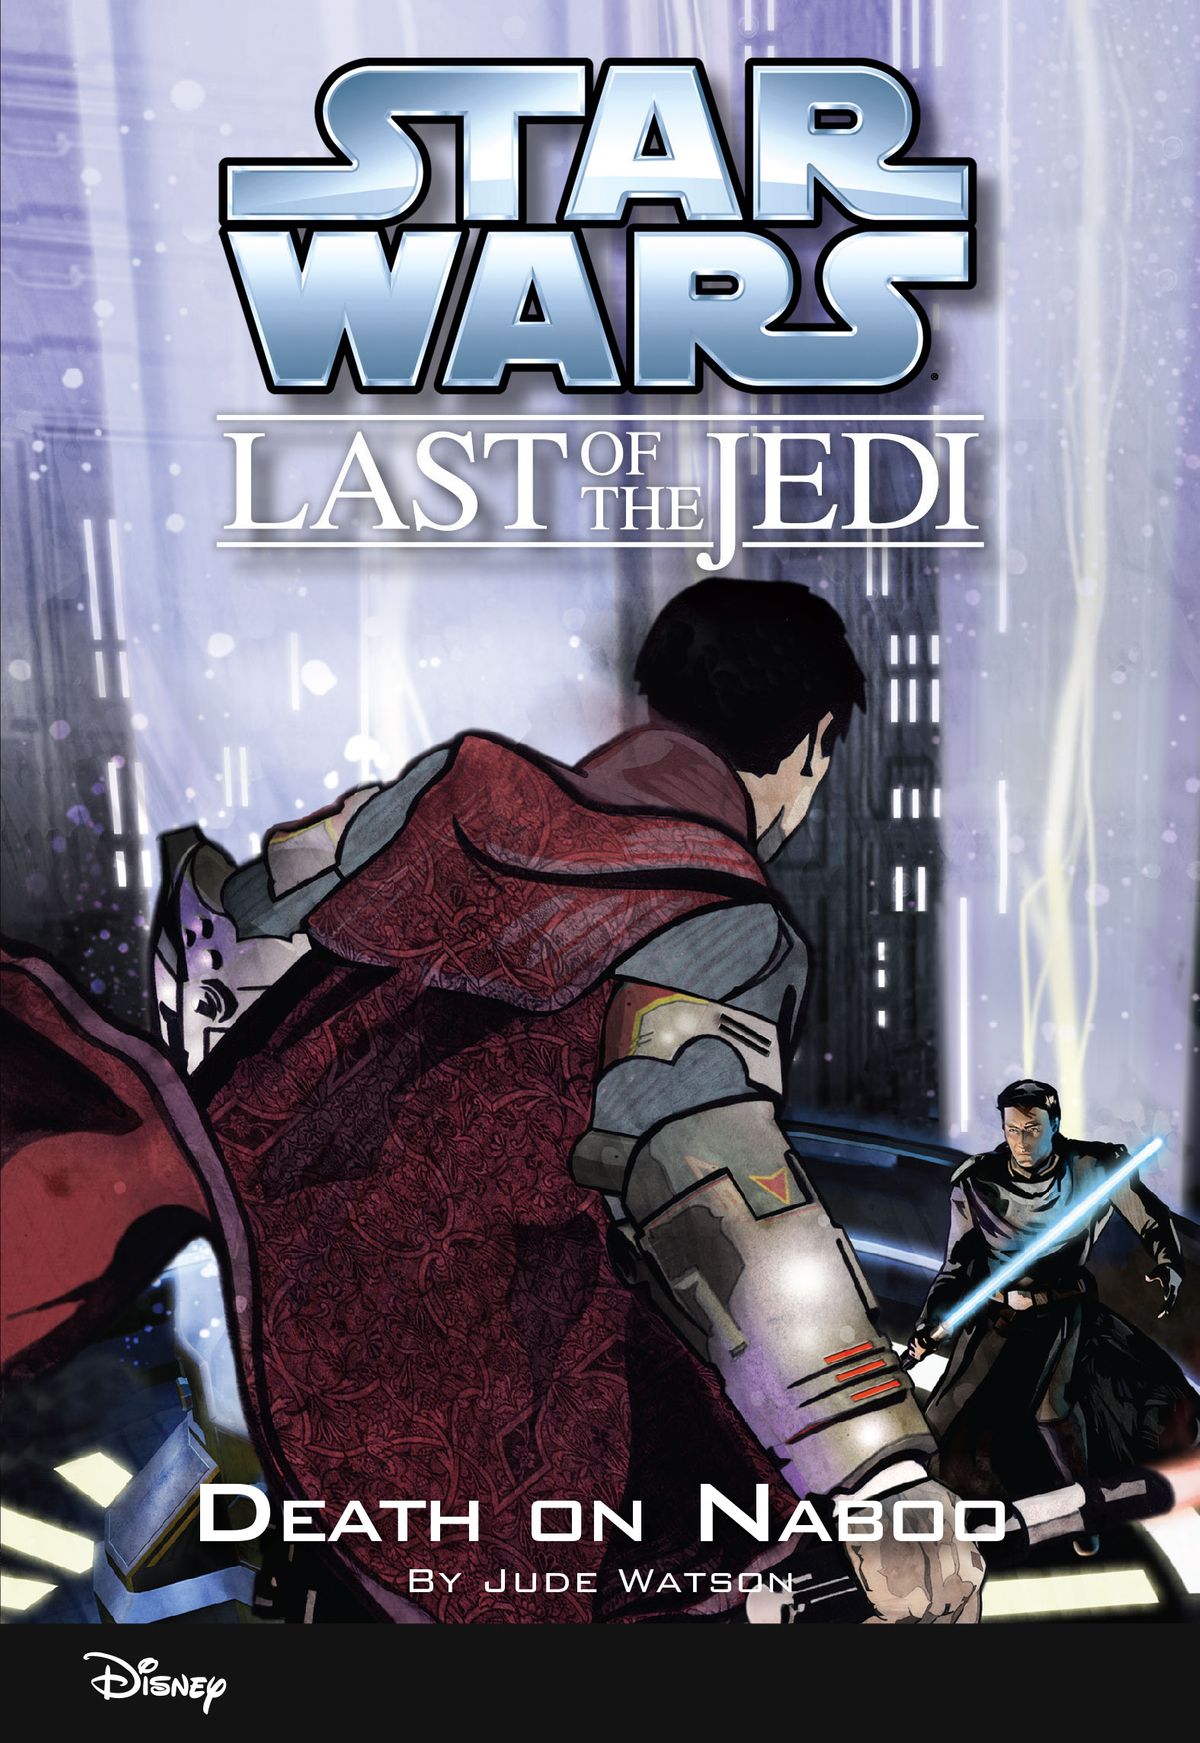 The Last of the Jedi: Death on Naboo